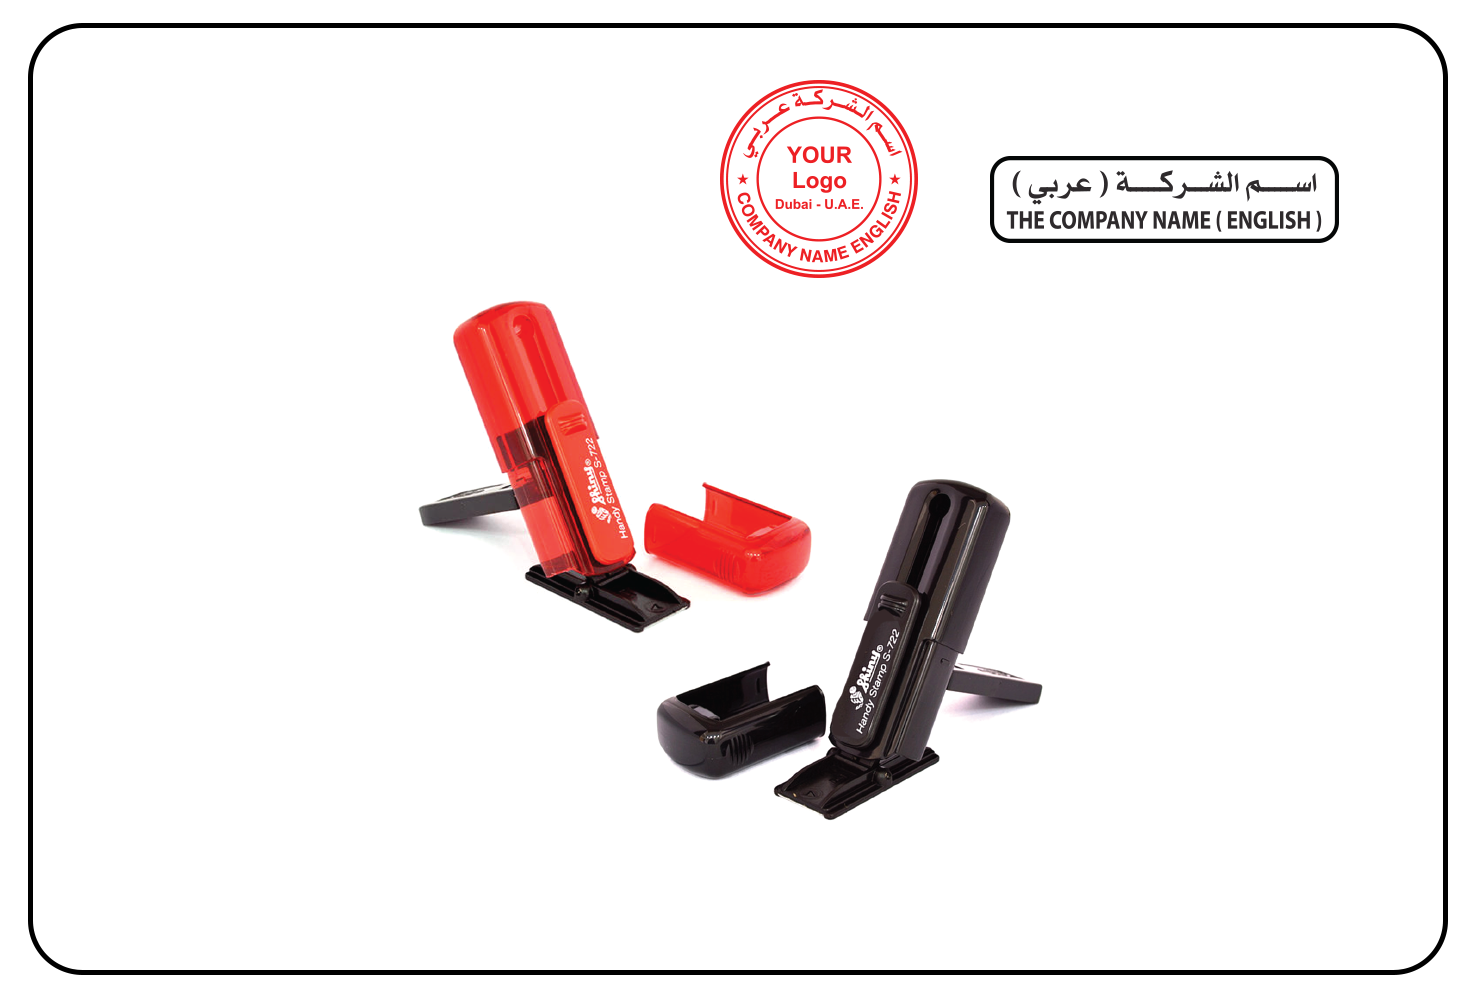 Compact pocket self-inking stamp for easy, on-the-go stamping.